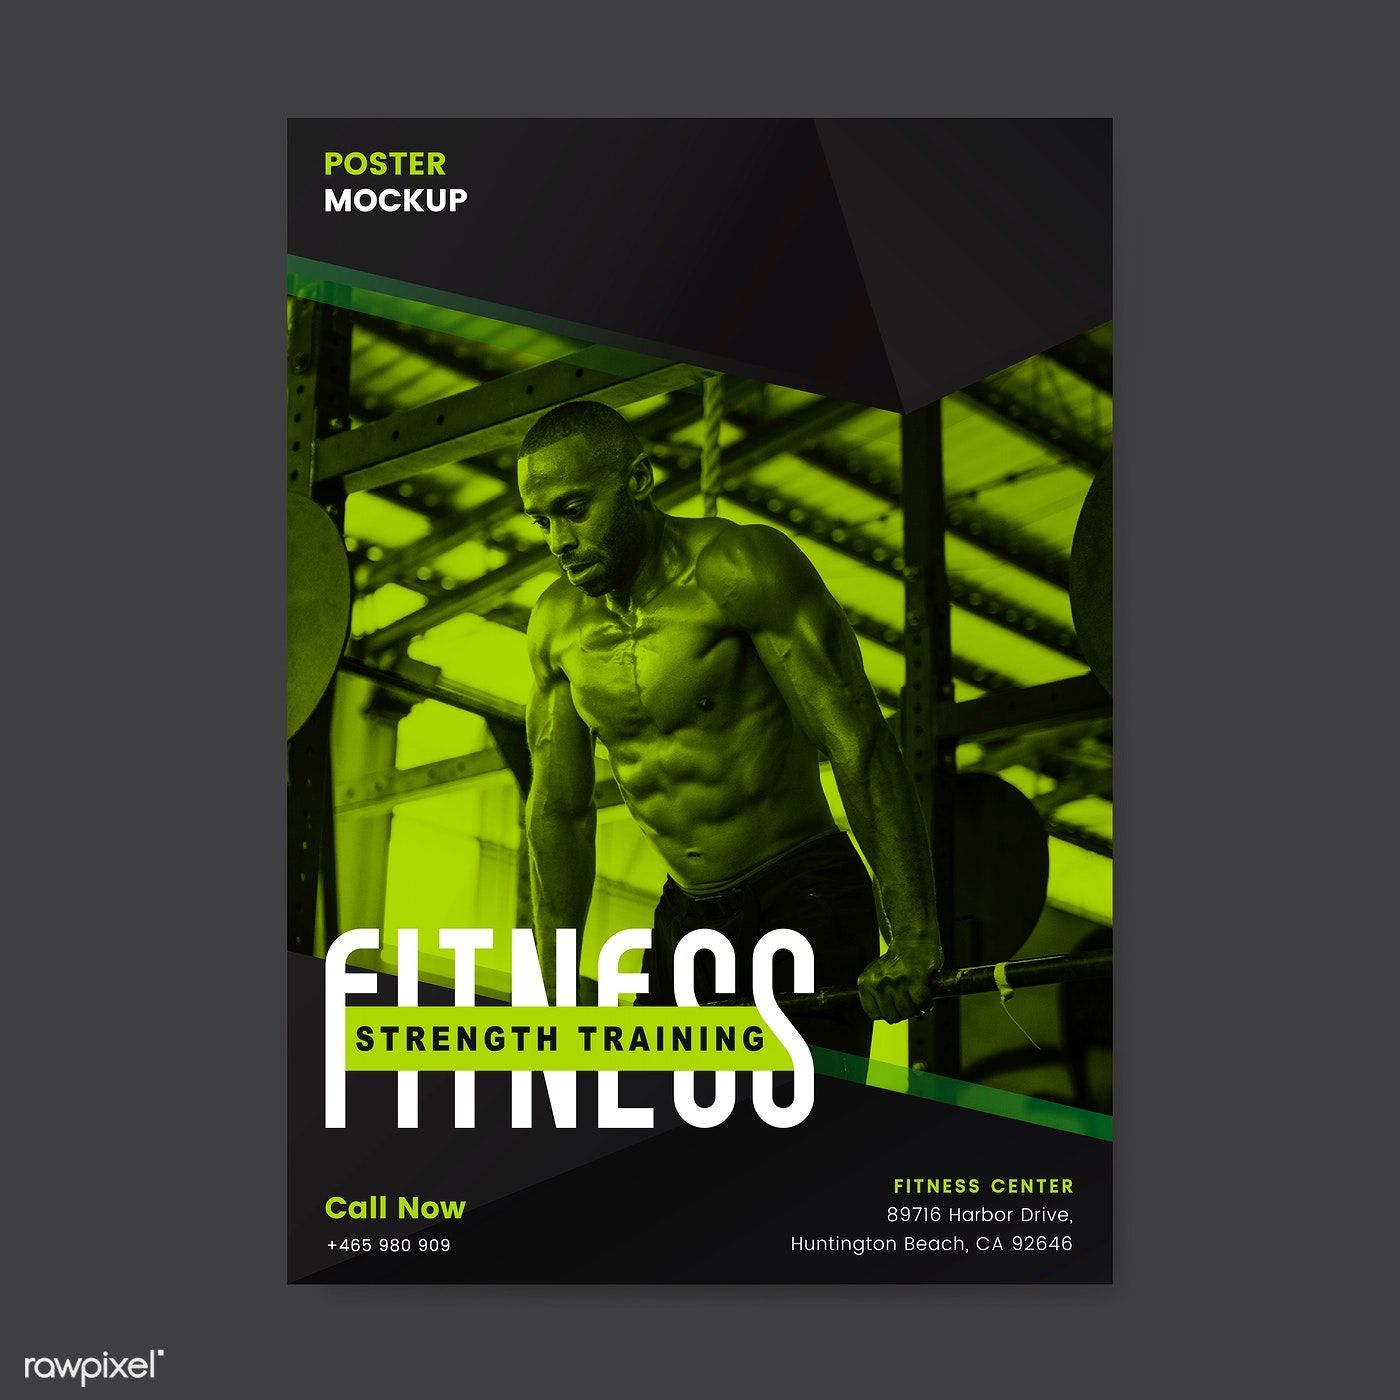 Download free vector of Fitness strength training poster vector 533060 - Download free vector of Fitness strength training poster vector 533060 -   12 fitness Poster vector ideas